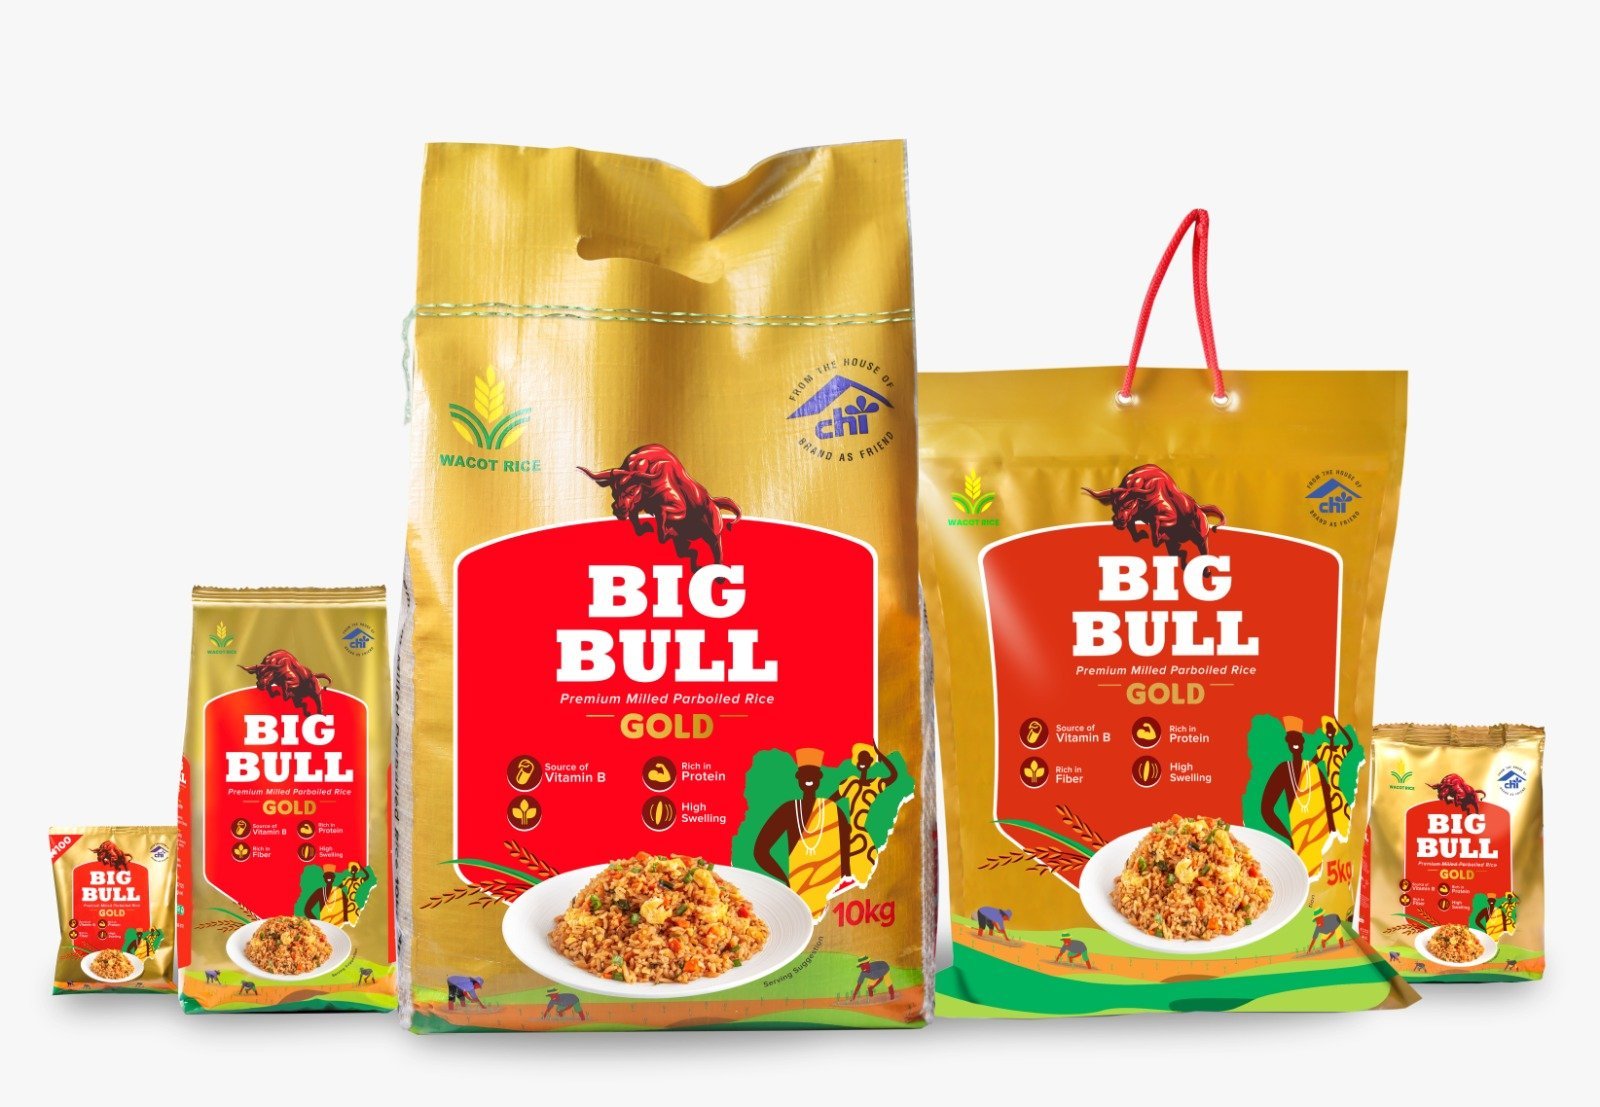 Nigeria: Tropical General Investments (TGI) Group Introduces Big Bull Gold in Consumer-Friendly Packs